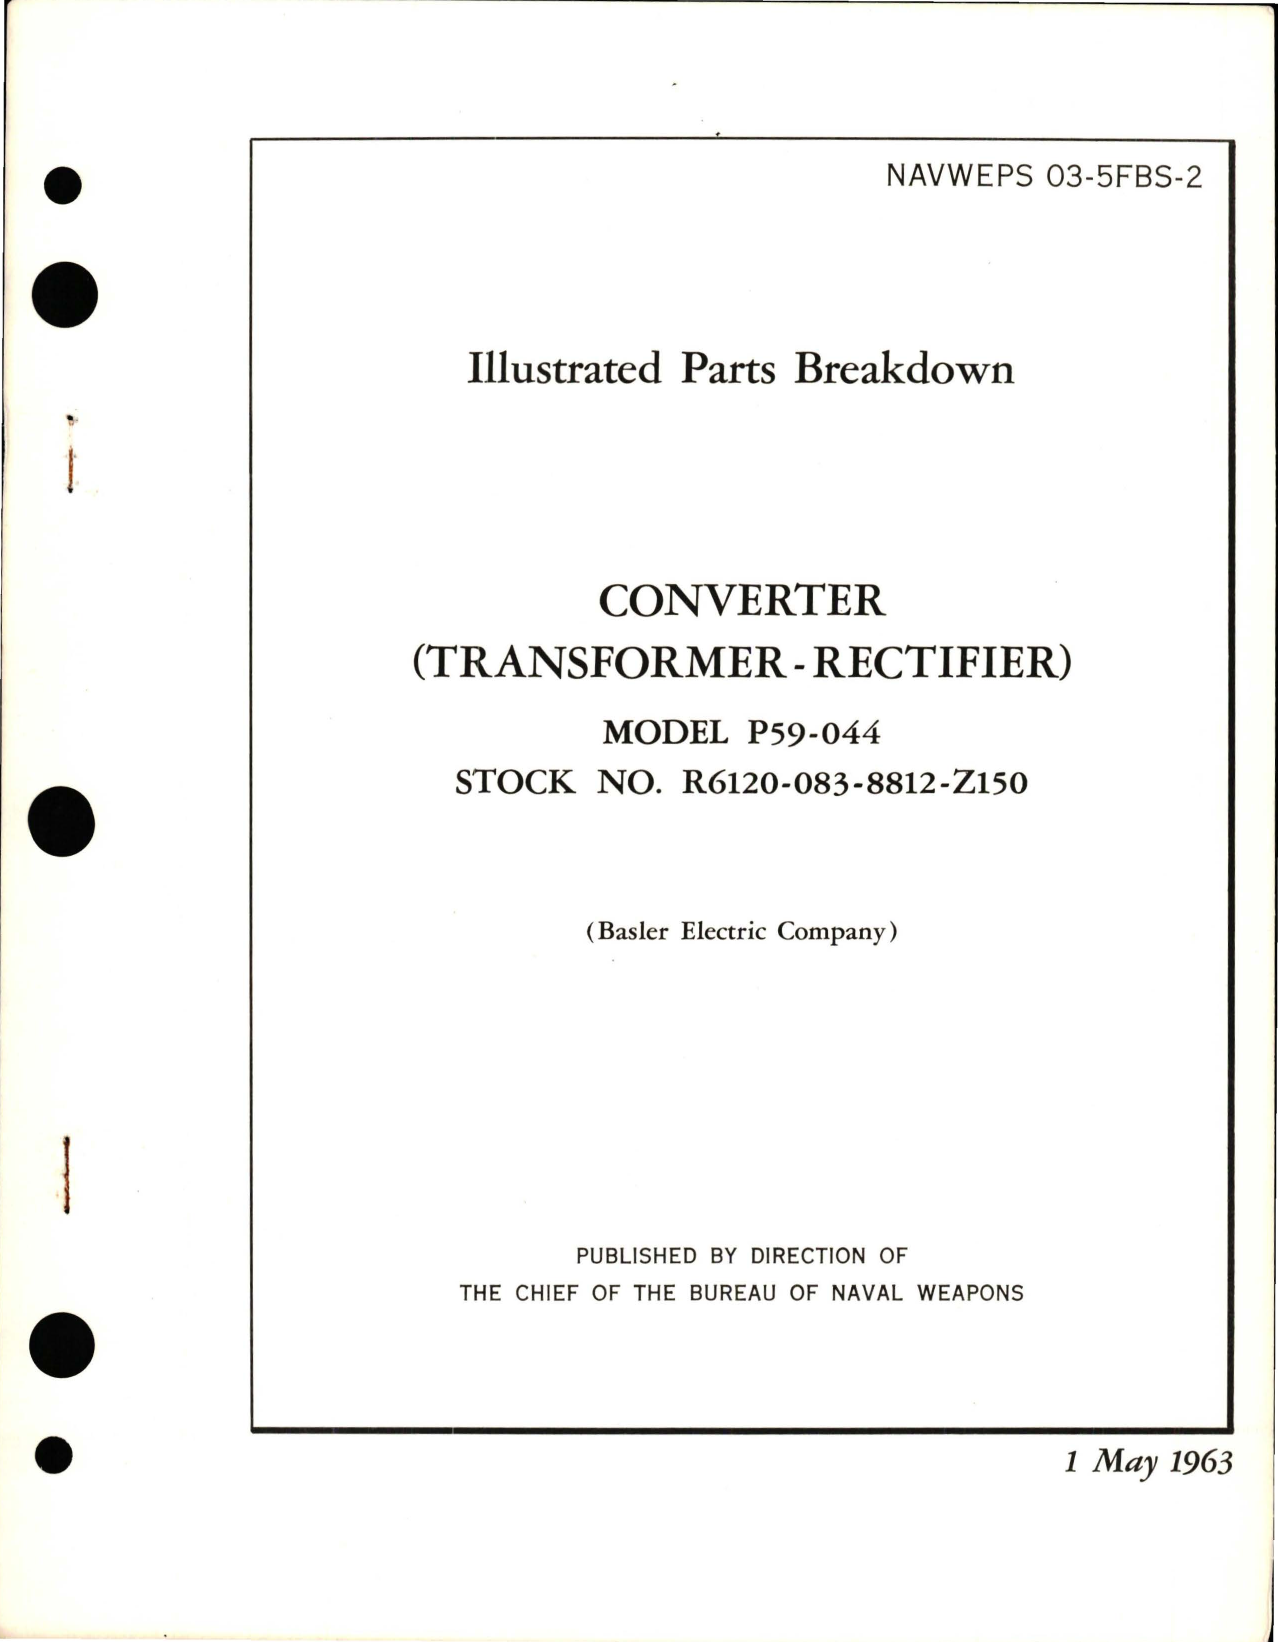 Sample page 1 from AirCorps Library document: Illustrated Parts Breakdown for Transformer Rectifier Converter - Model P59-044